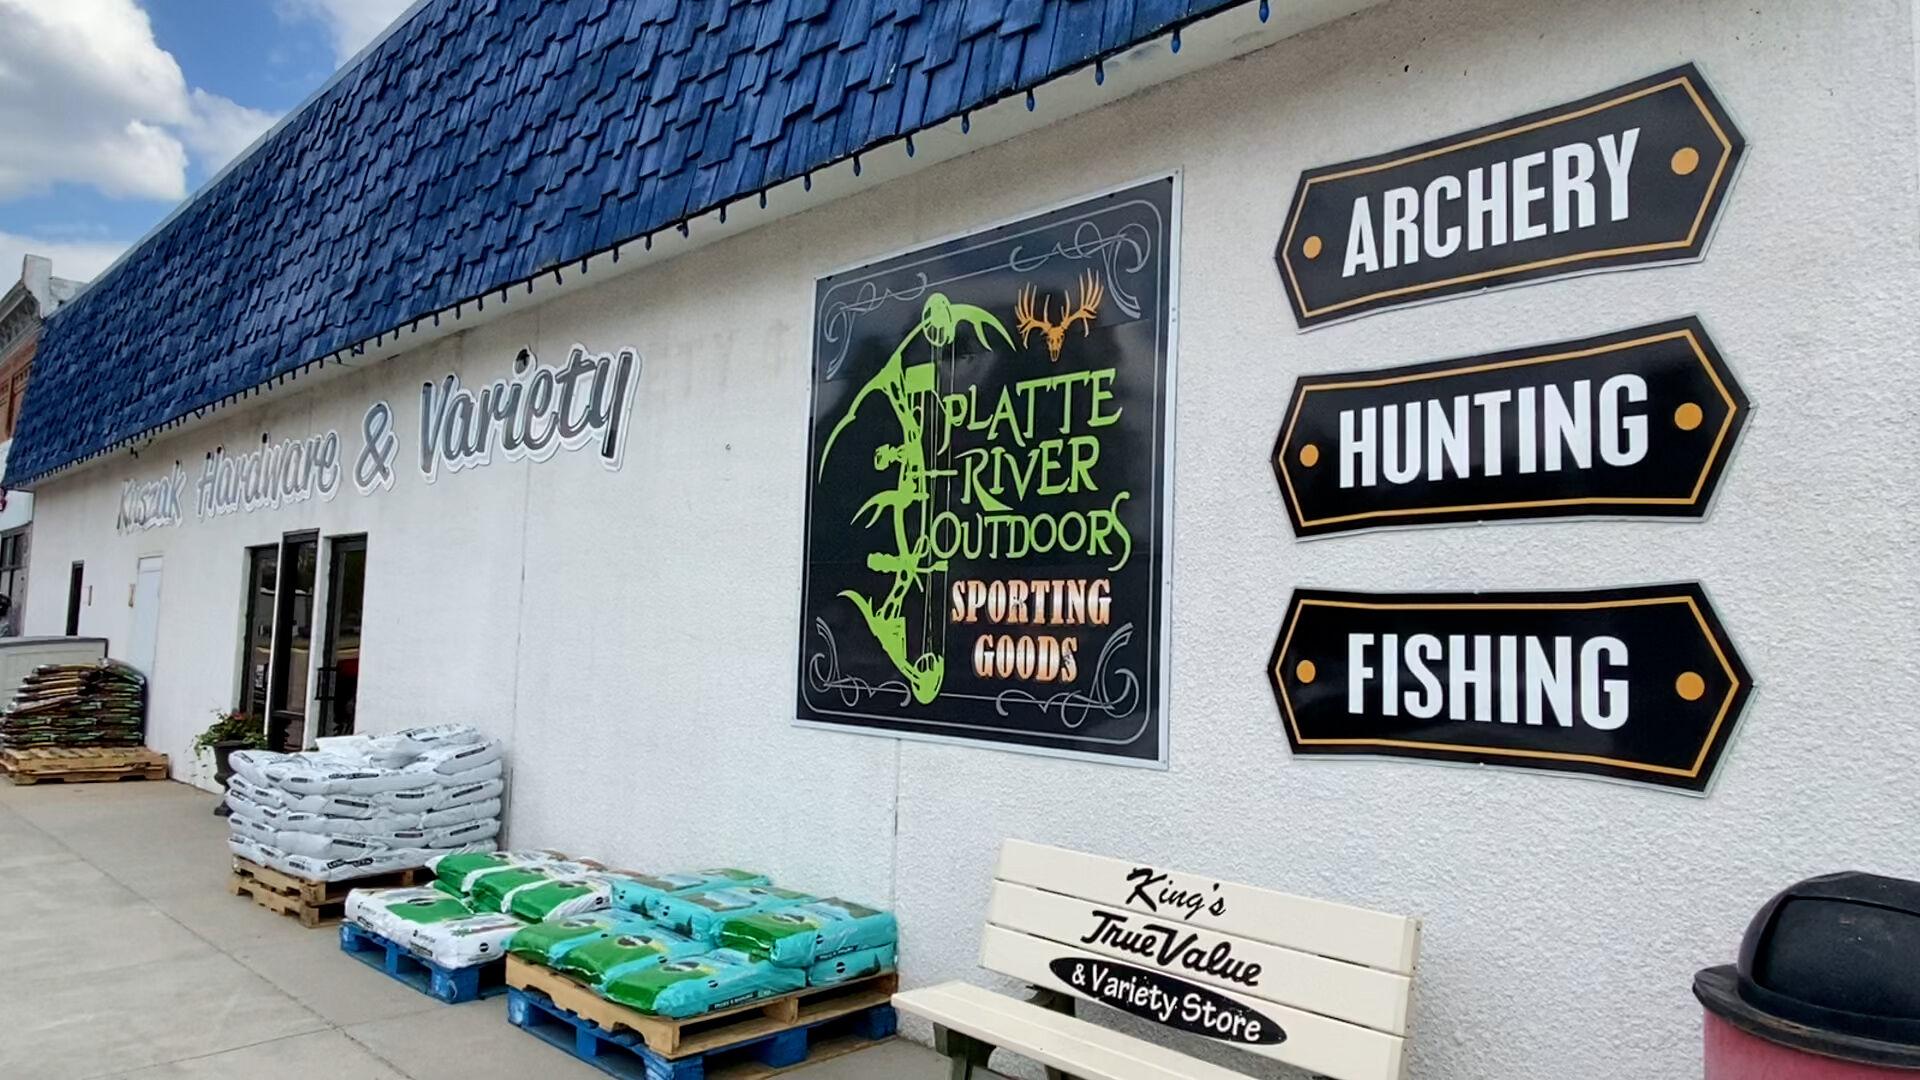 No-brainer:' Brothers open Loup City outdoor store to cater to